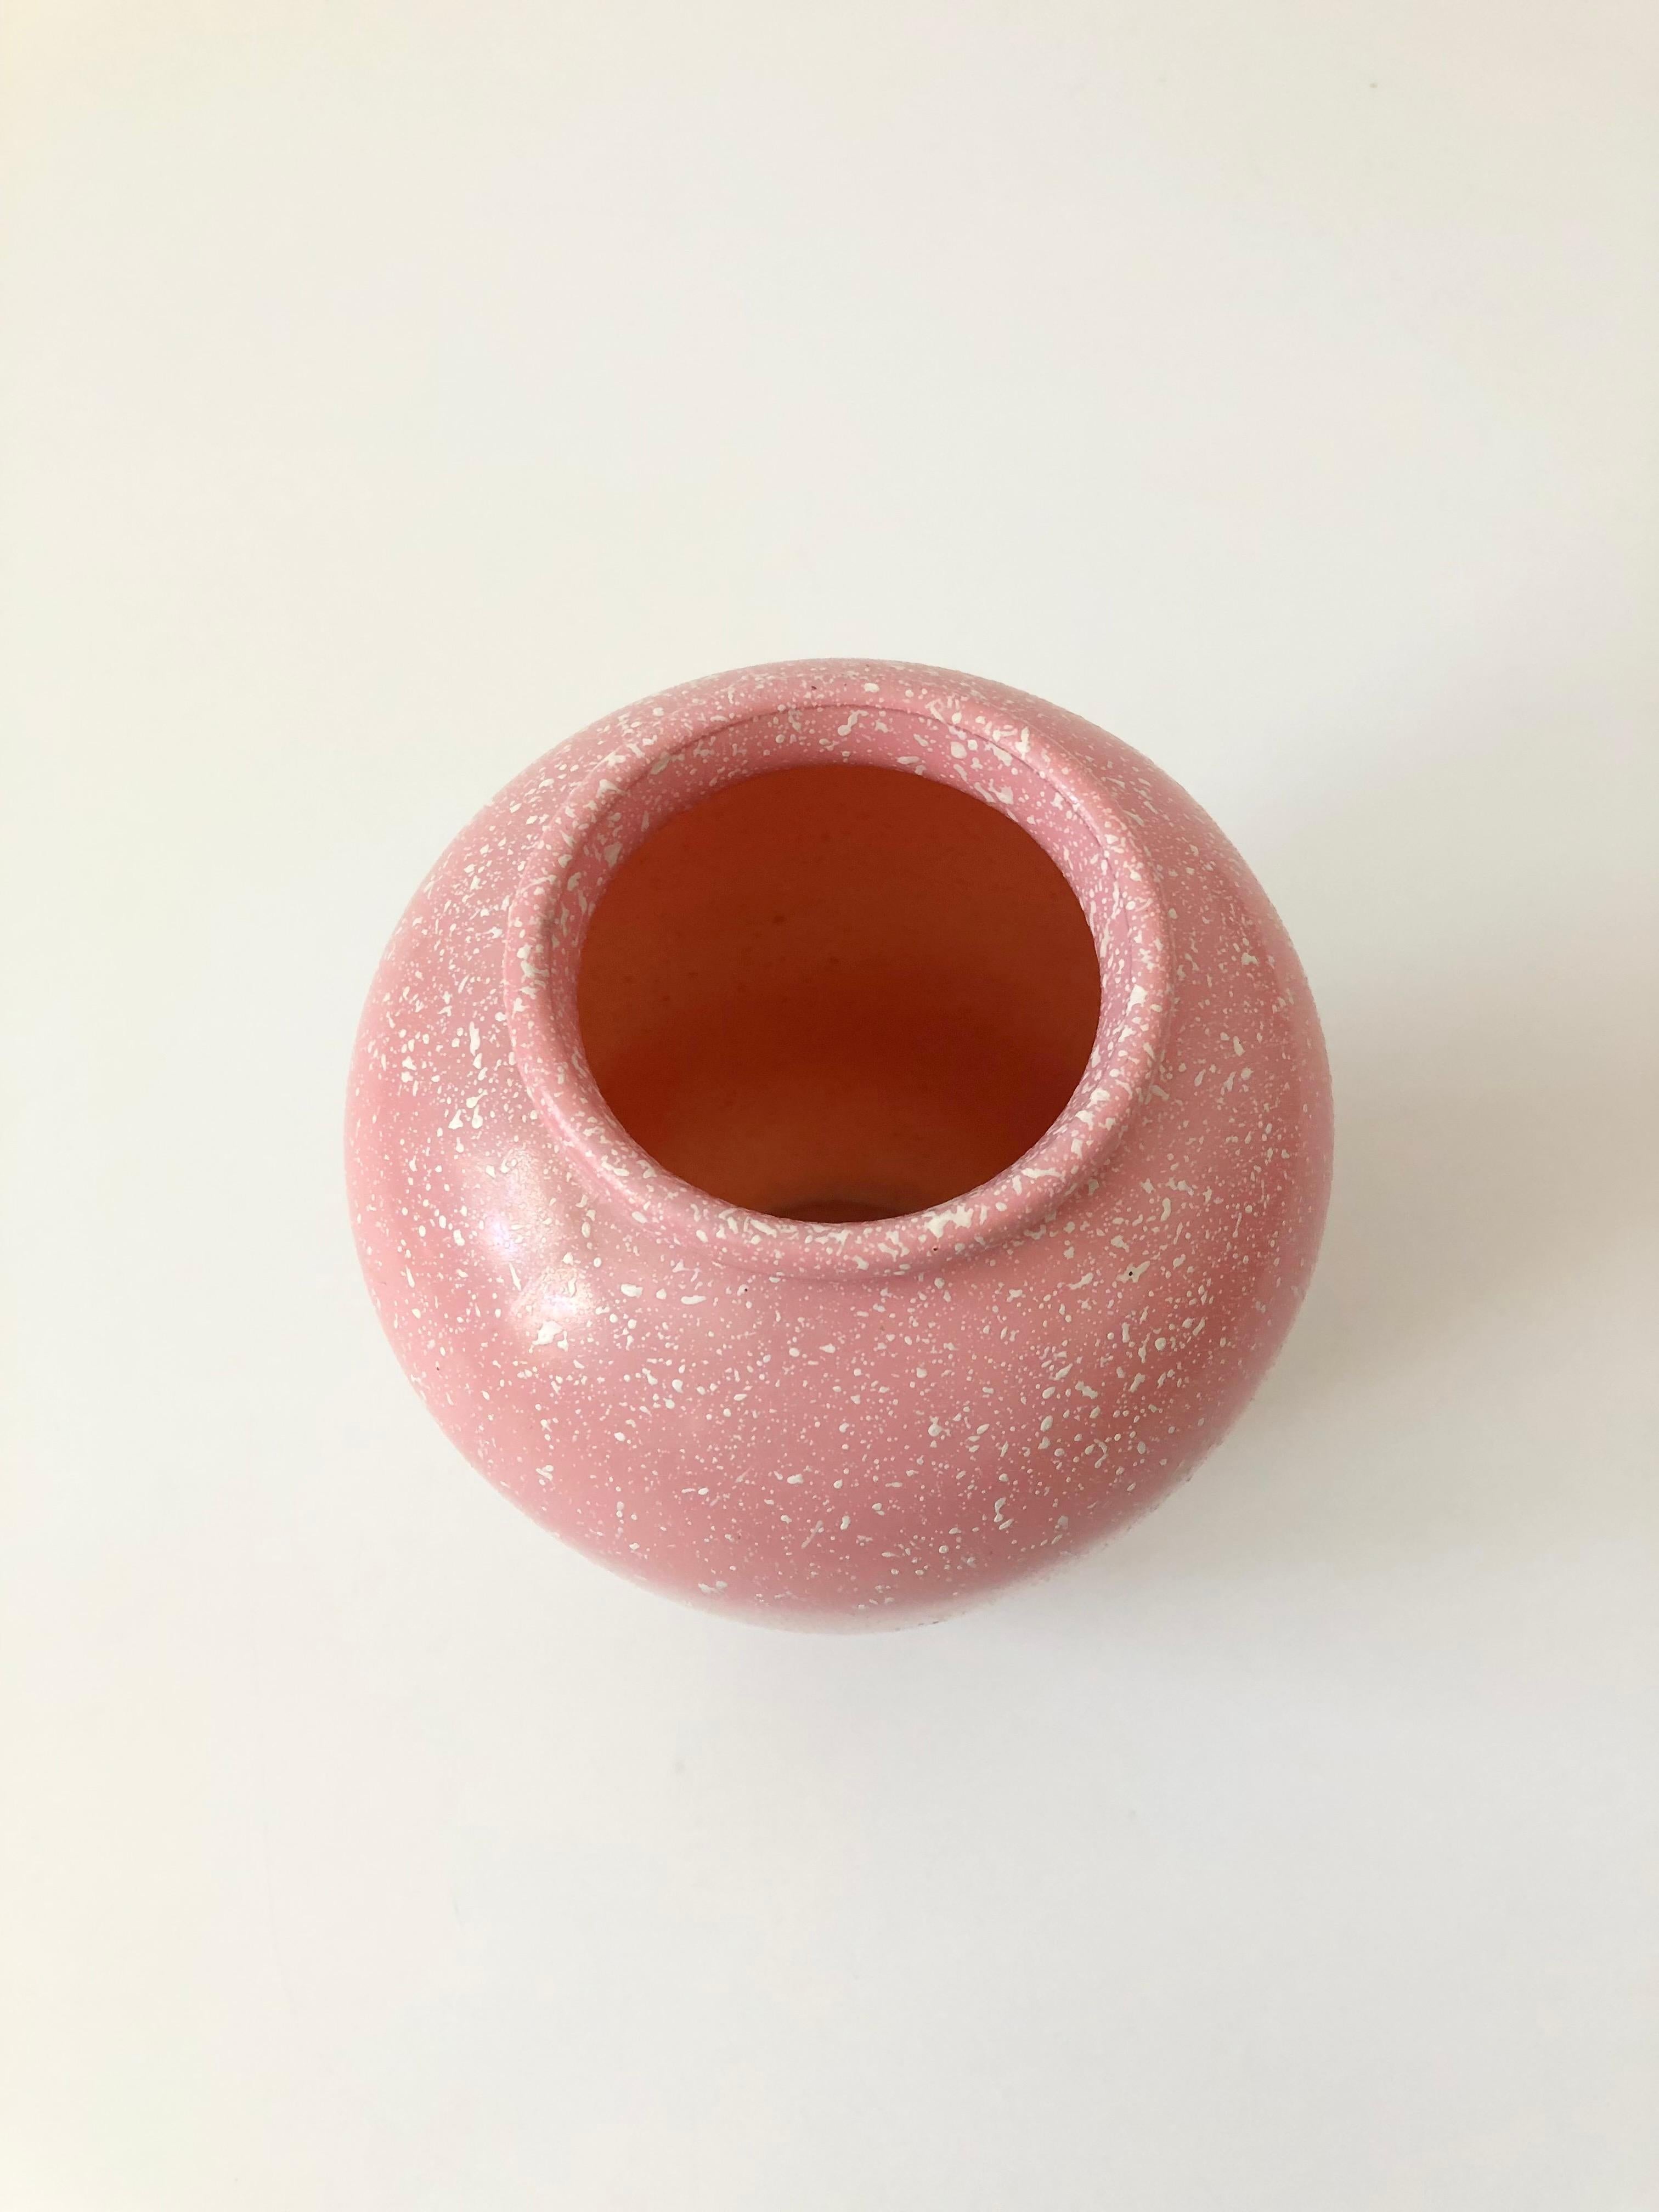 A tall vintage glass vase with a lovely speckled pale pink color to the glass. Nice size in a circular tapered shape. Made in Portugal by Studio Nova.